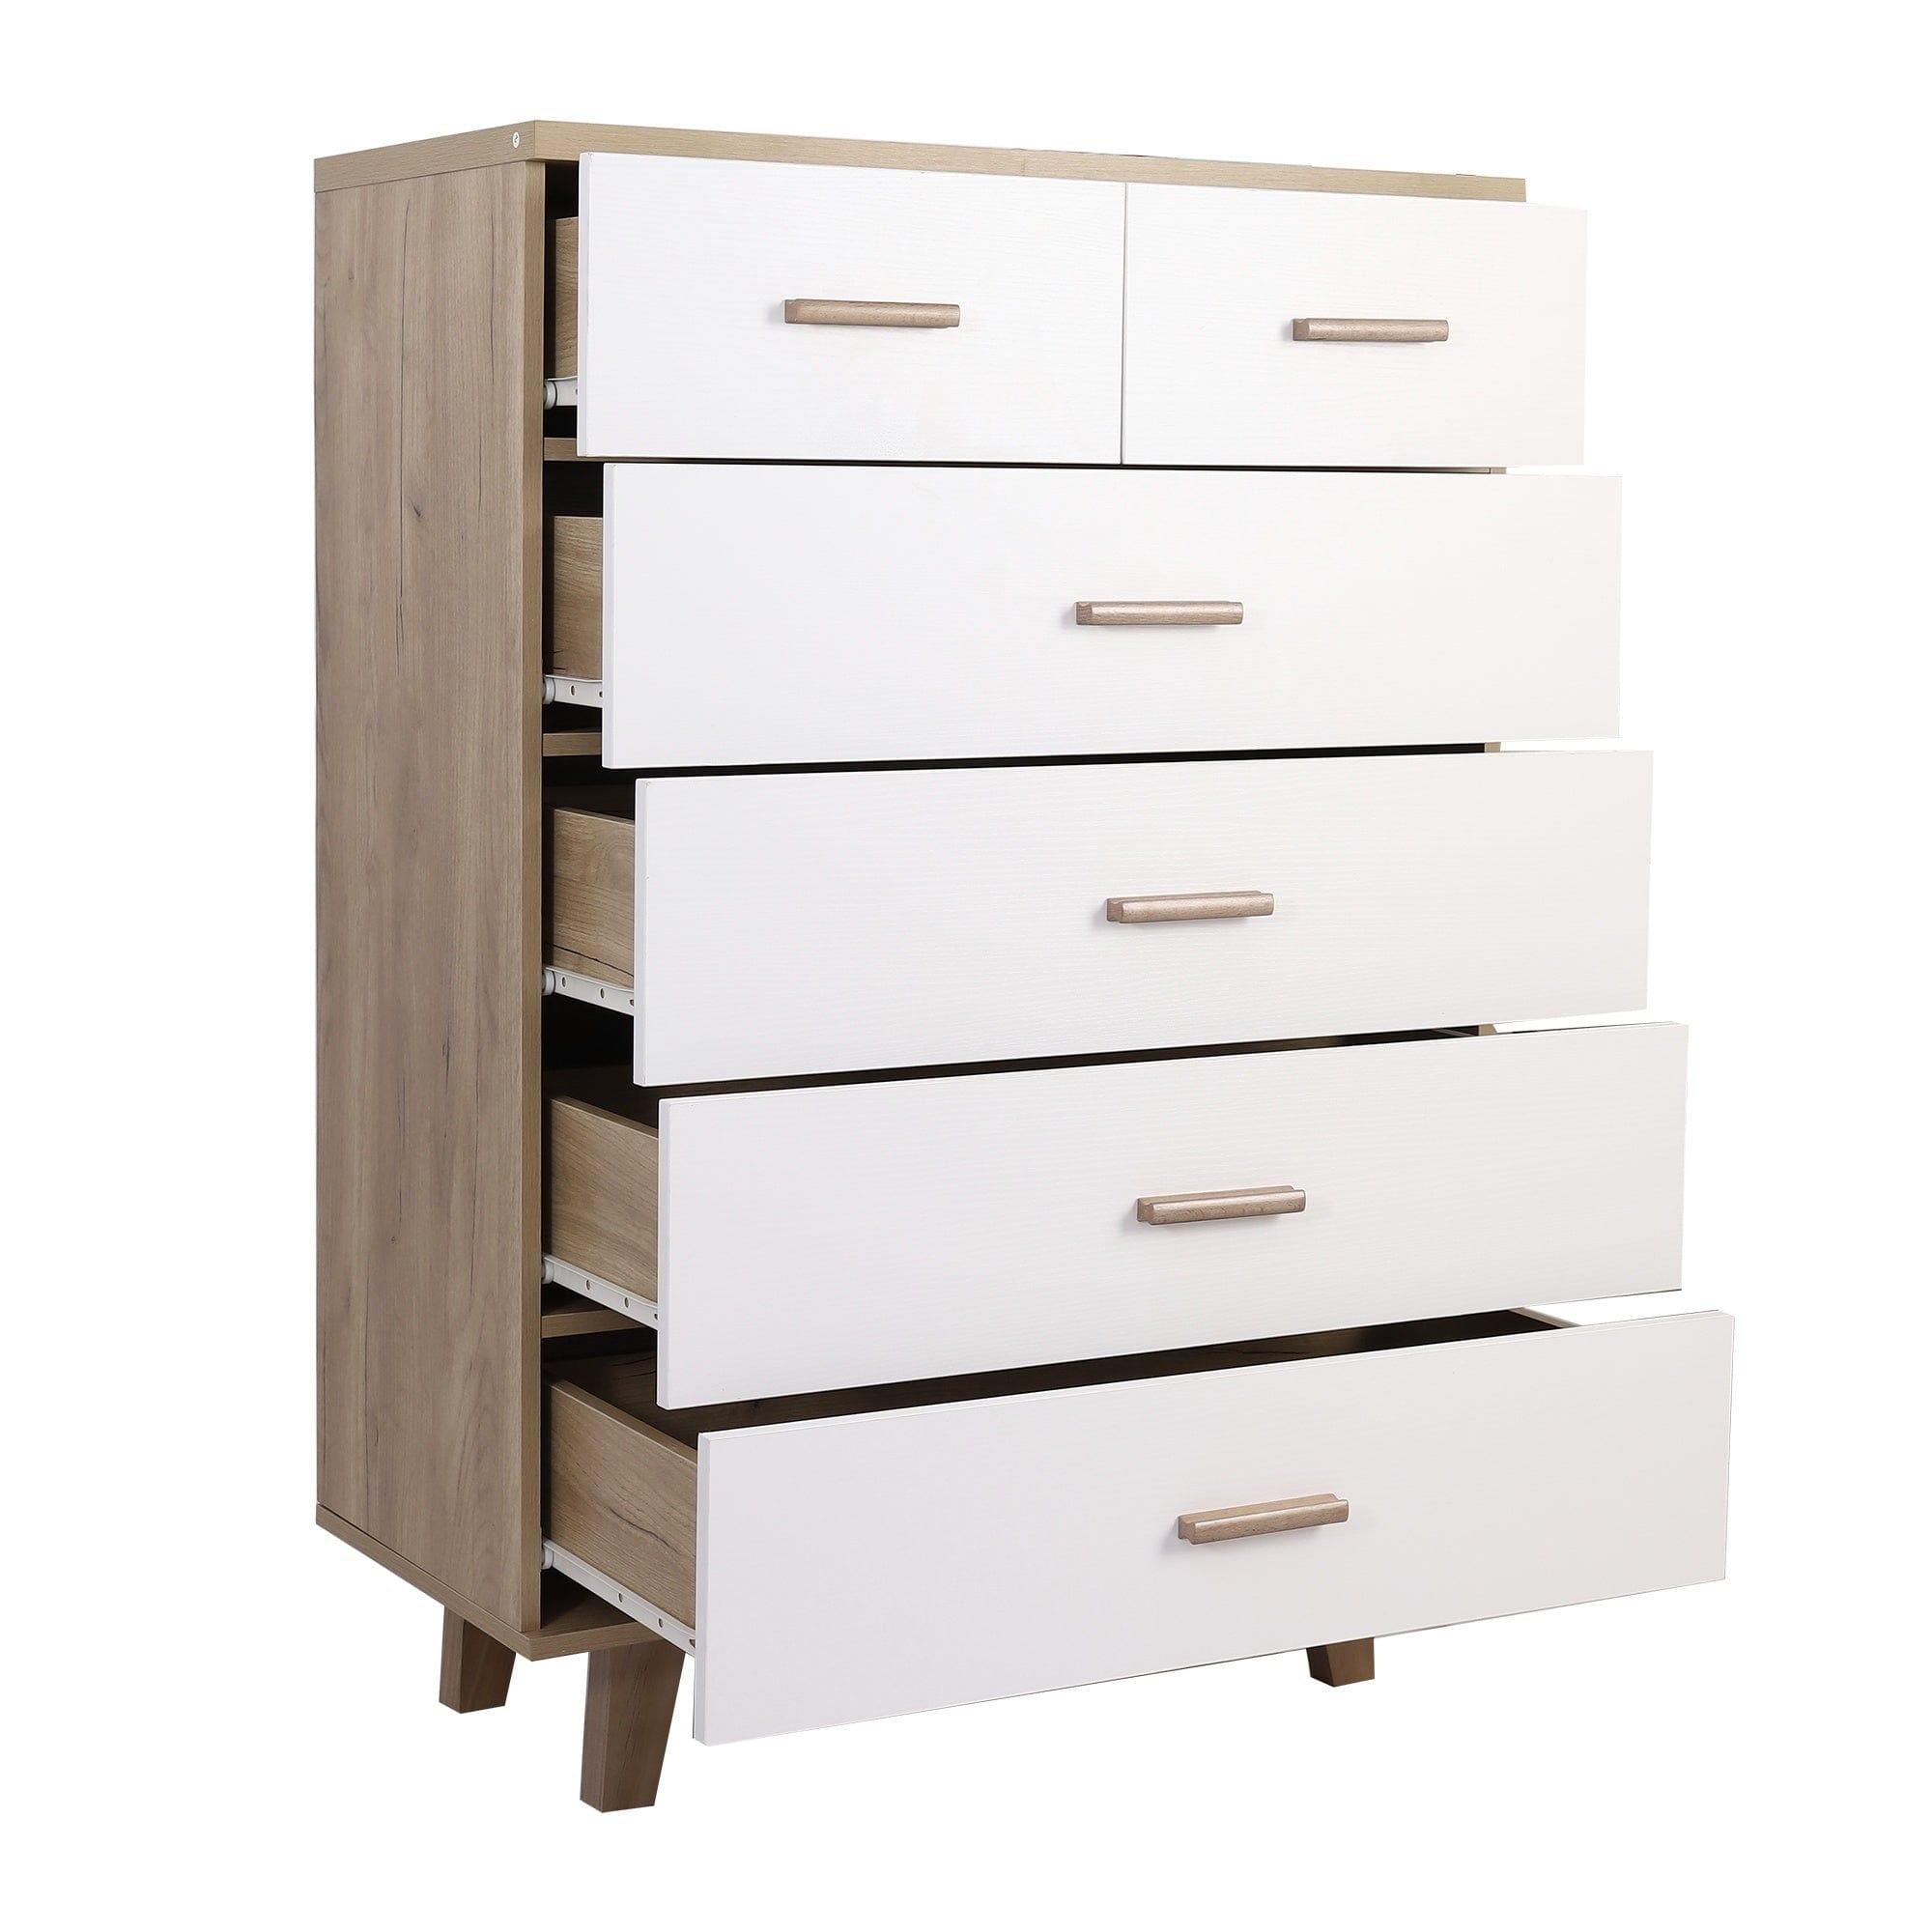 Shop Storage Cabinet Dresser Bedside Table Chest Simple Bedroom Furniture Solid Wood Feet and Handles Fashionable Bedside Cabinet Two and Four Combo Drawers Cabinet Mademoiselle Home Decor